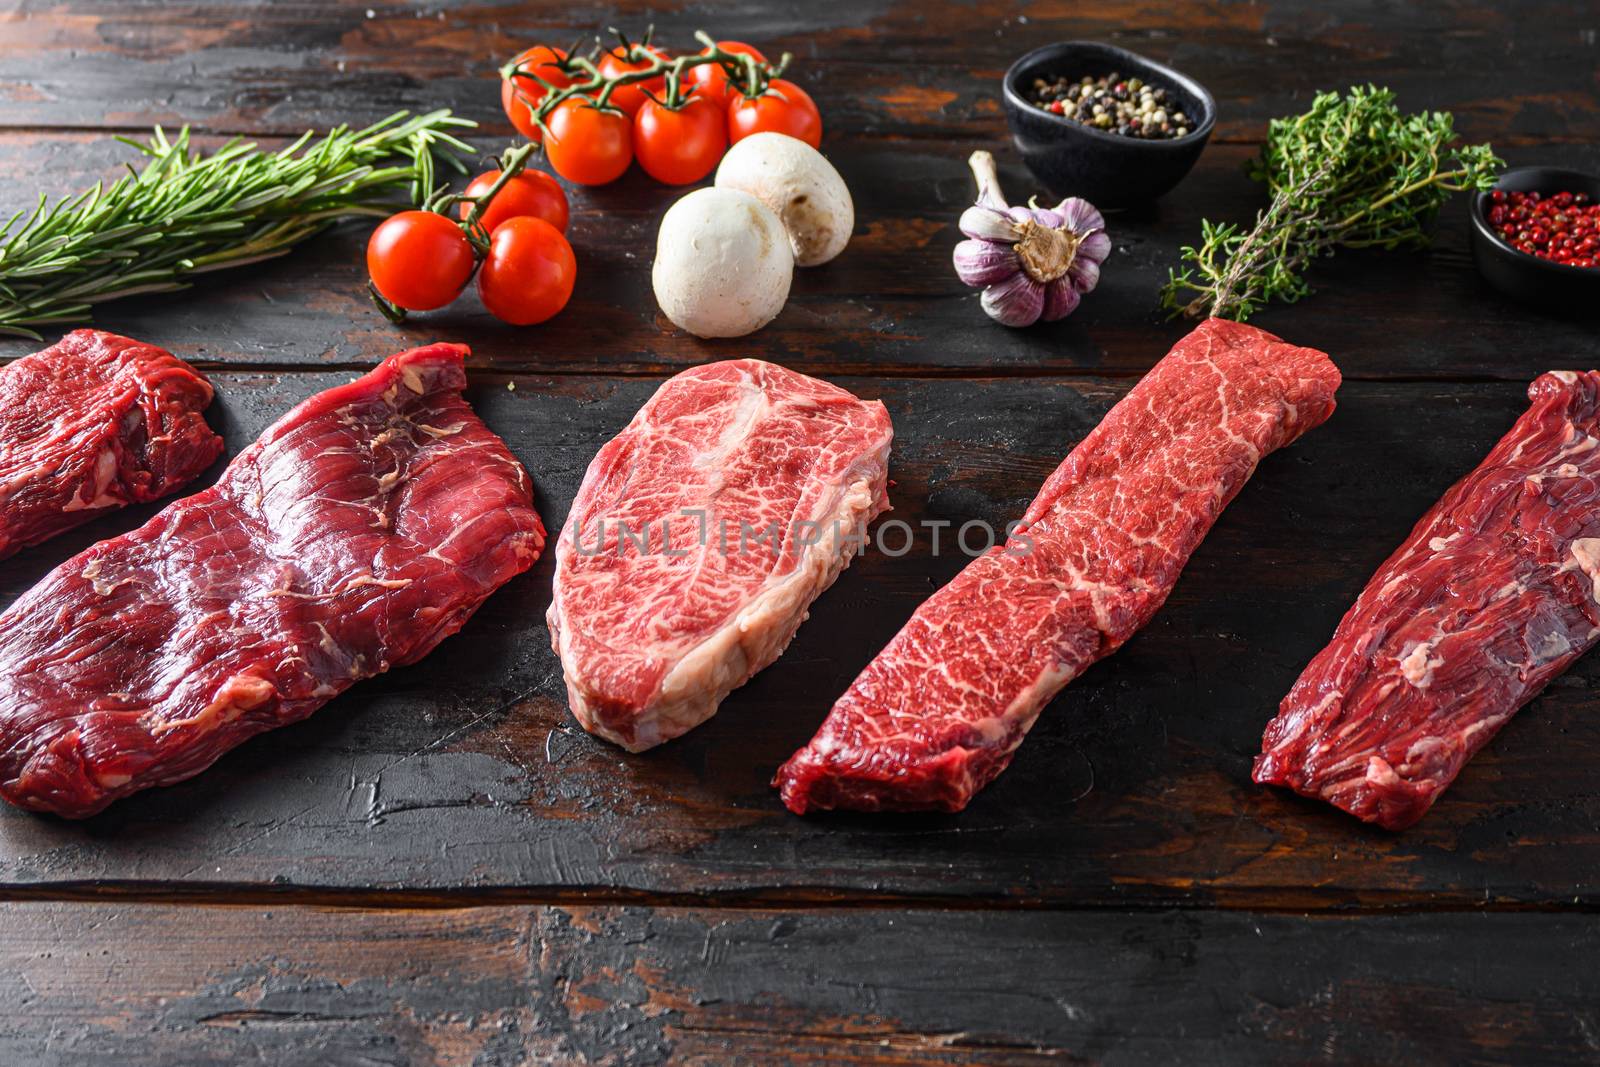 A set of different types of raw beef steaks alternative cut flap flank Steak, machete steak or skirt cut, Top blade or flat iron beef and tri tip, triangle roast with denver cut with fresh organic herbs over wood background side view space for text by Ilianesolenyi